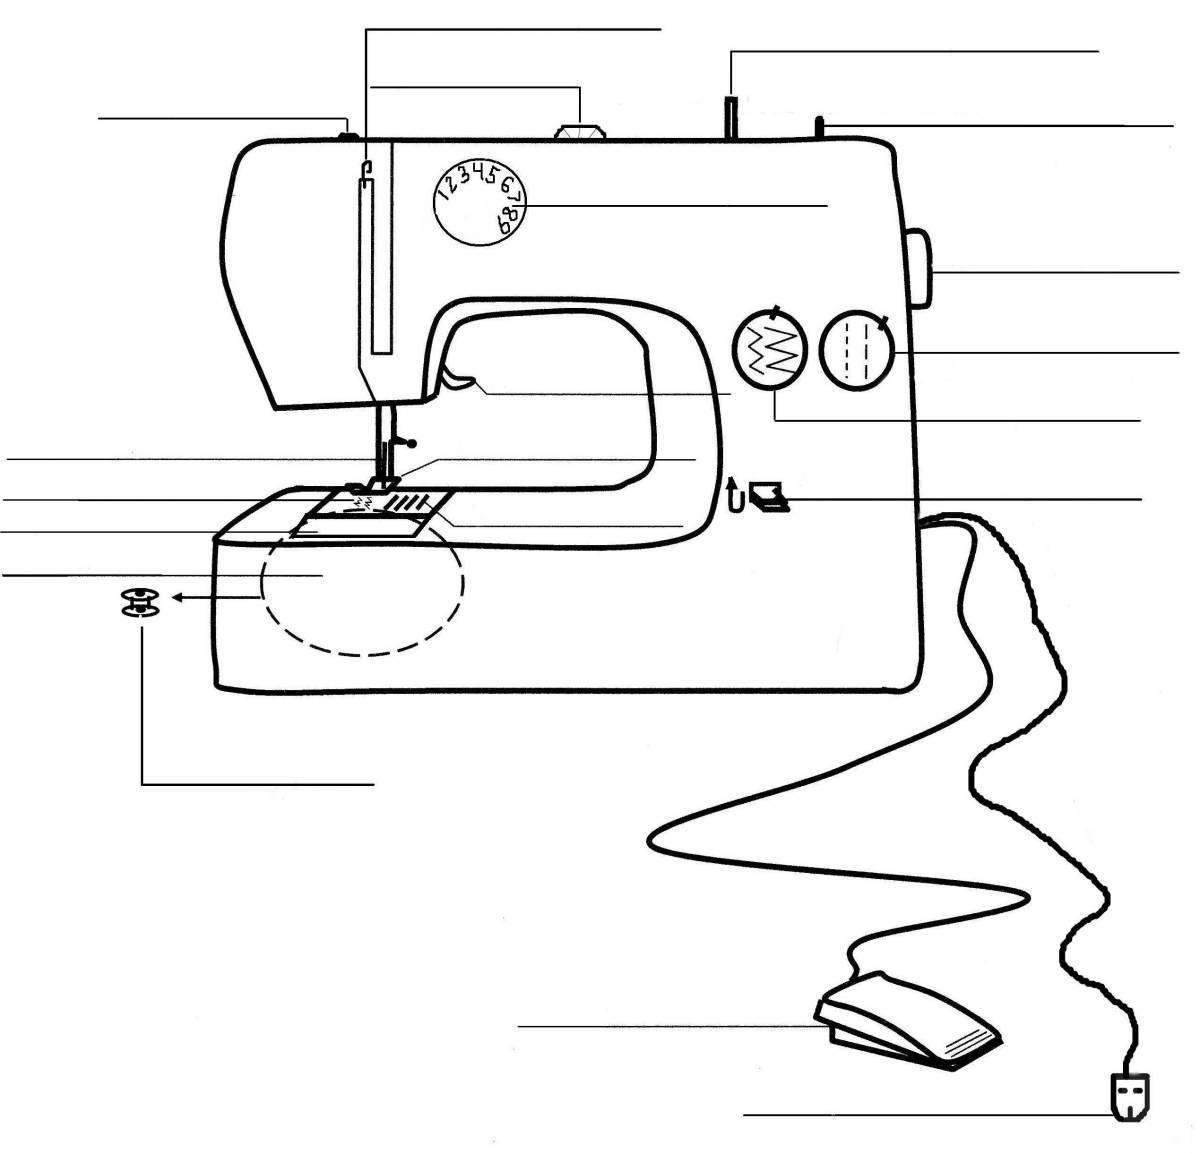 Adorable sewing machine coloring book